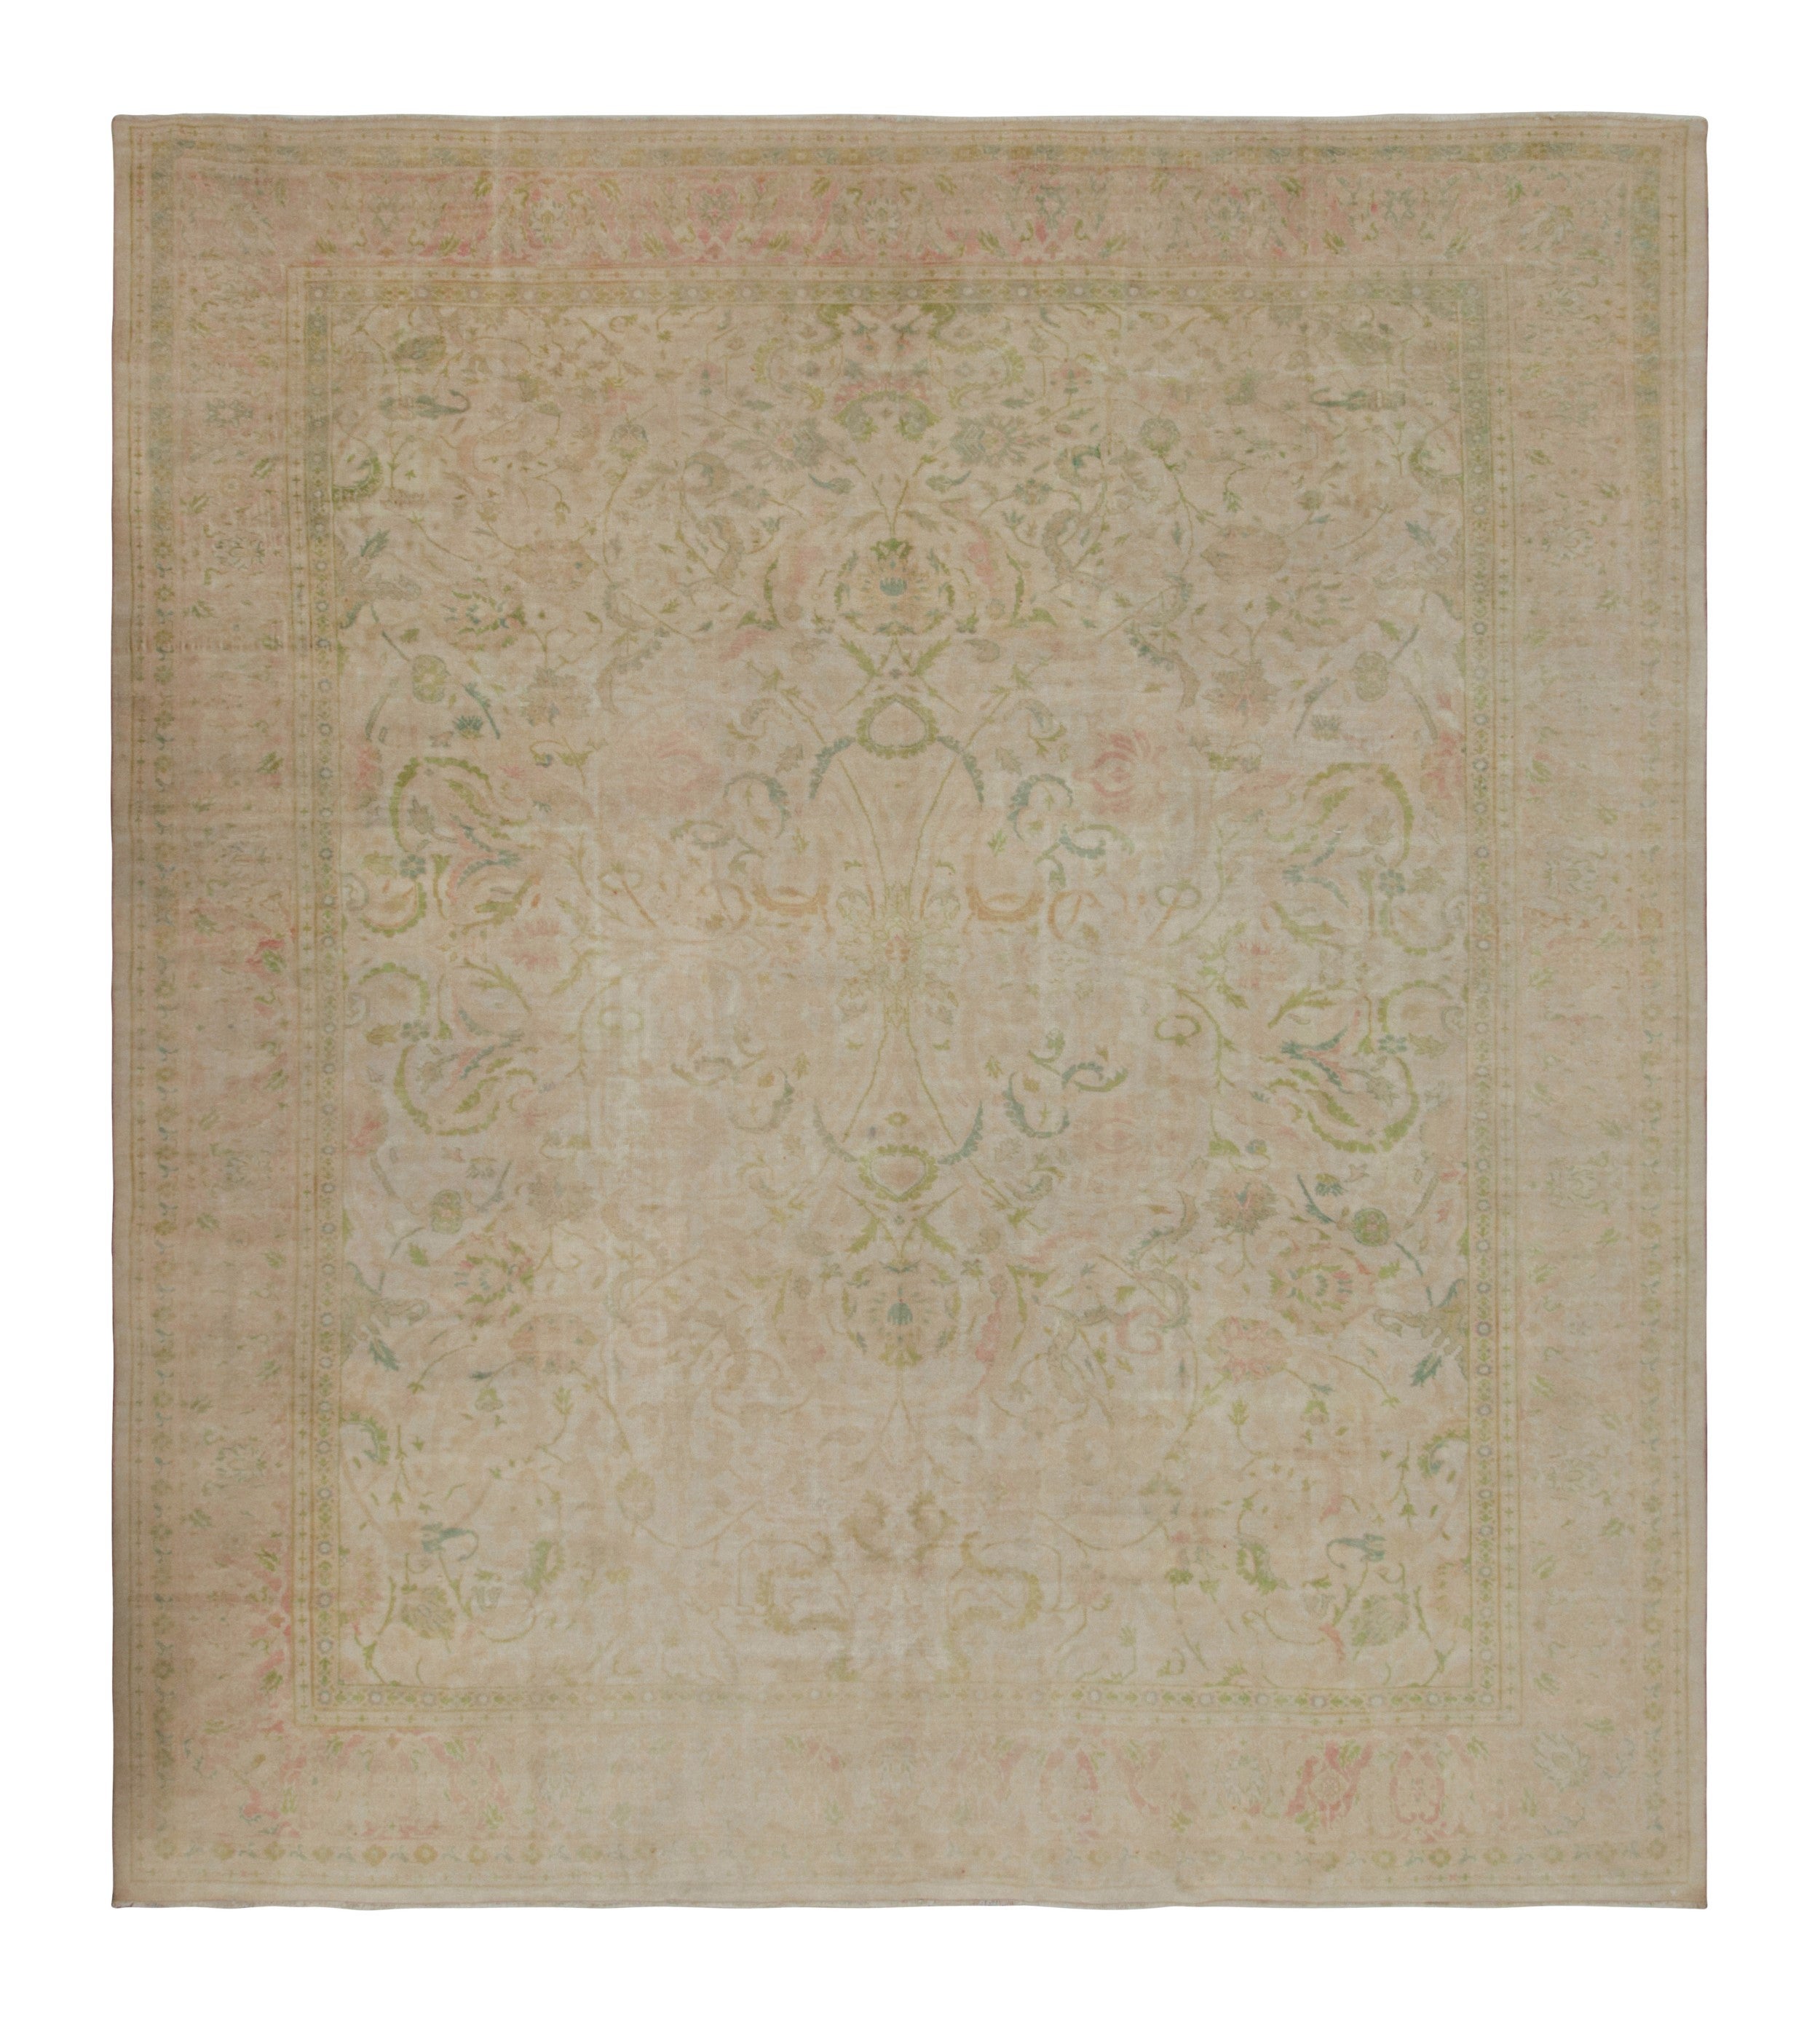 Rare Antique Sivas Rug, with Pink and Green Floral Patterns, from Rug & Kilim For Sale